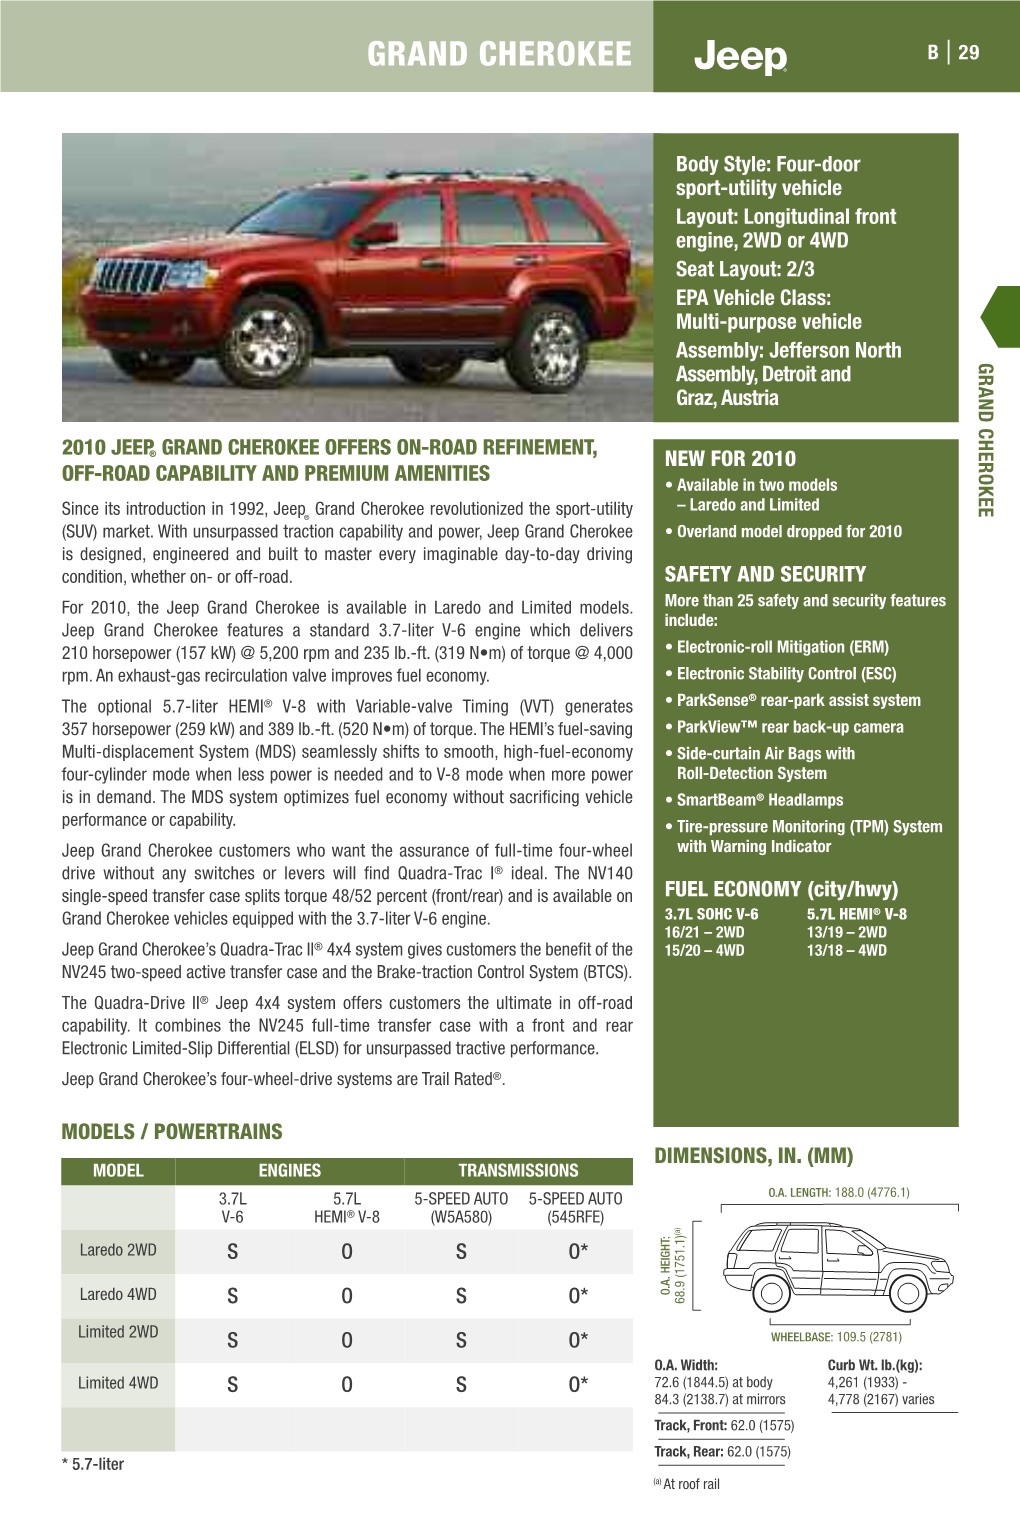 2010 Jeep Grand Cherokee Specifications